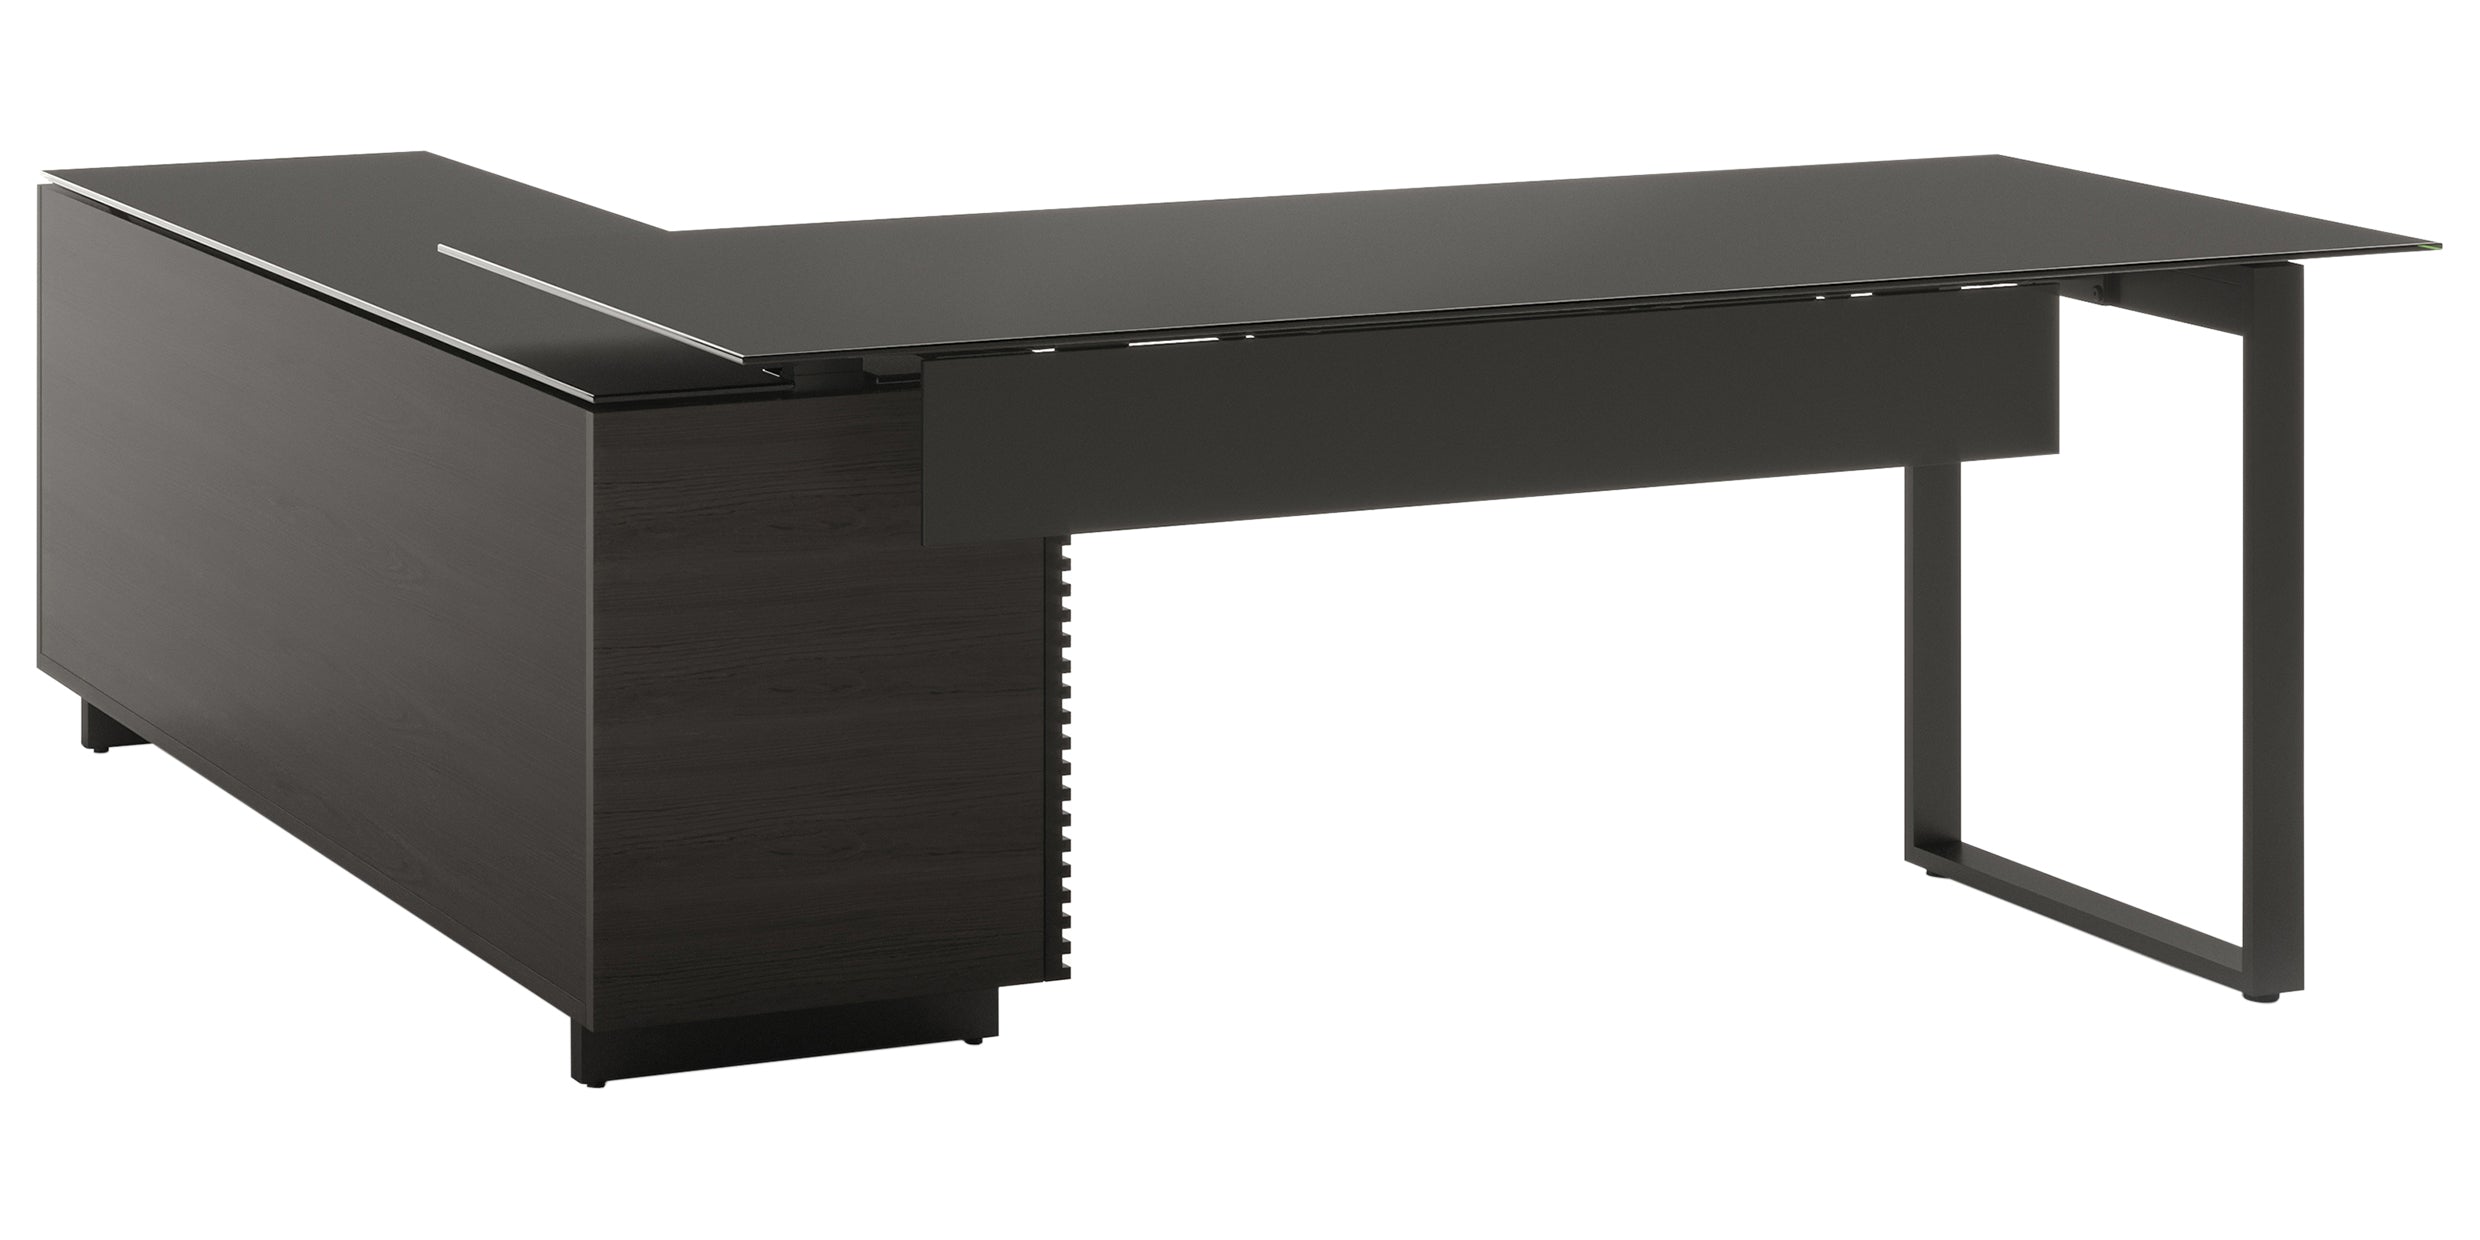 Charcoal Stained Ash & Charcoal Ash Veneer with Black Satin-Etched Glass & Black Steel | BDI Corridor L Shaped Desk | Valley Ridge Furniture